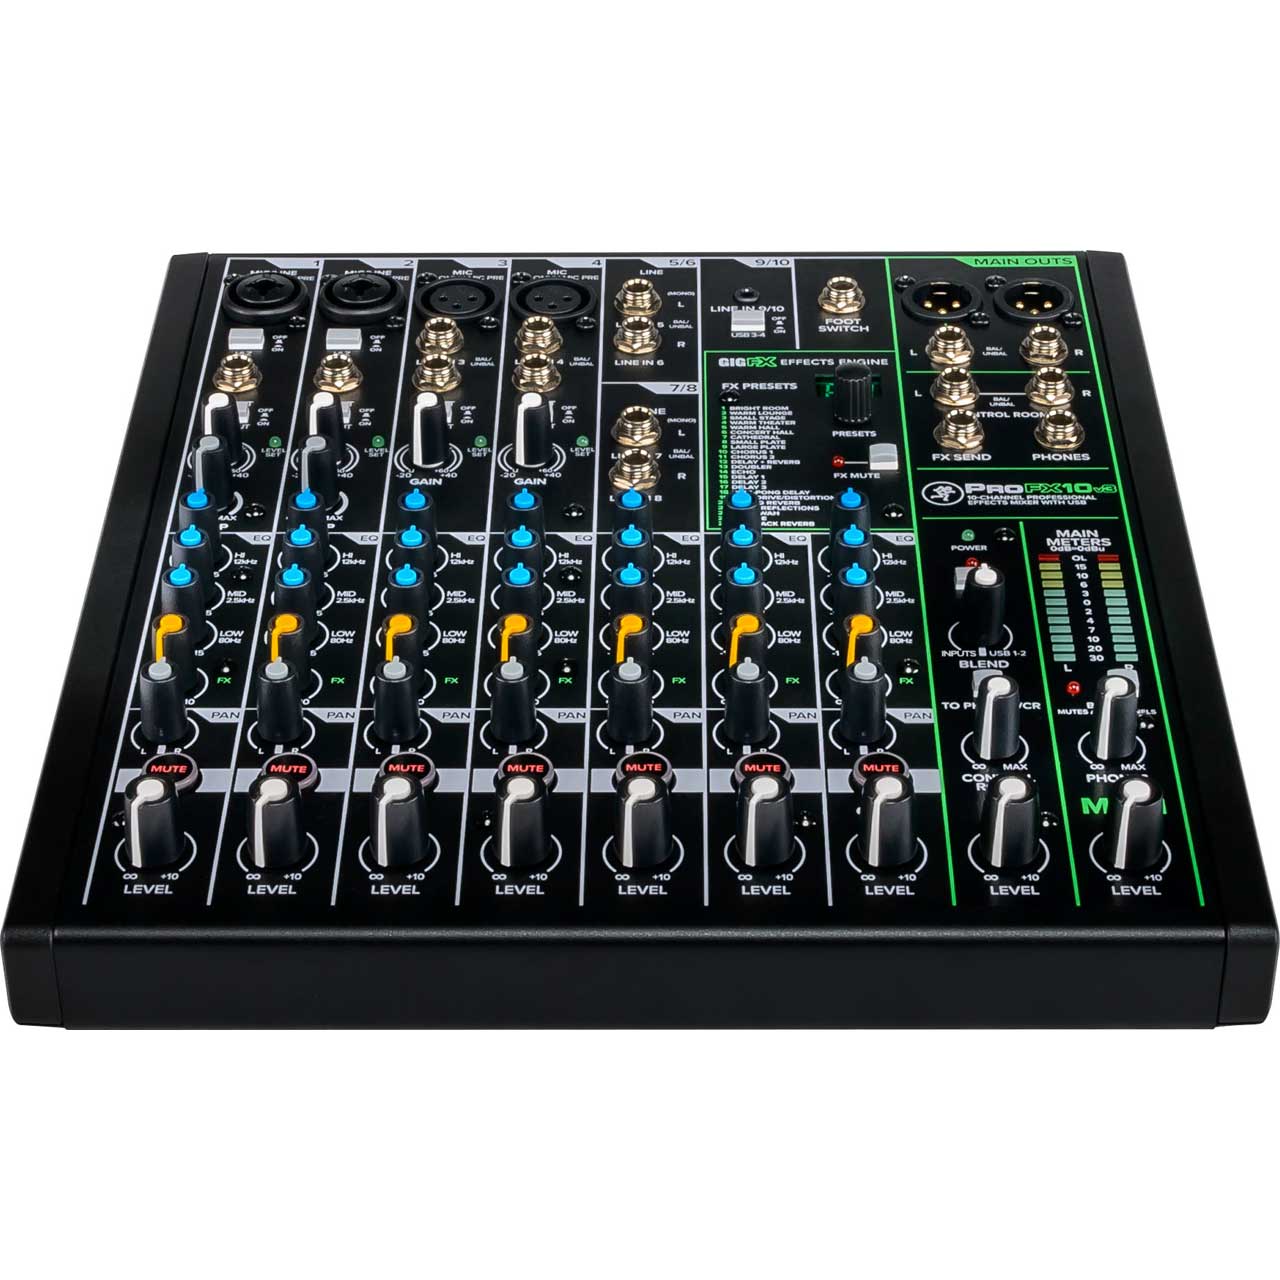 mackie-profx10v3-10-channel-professional-effects-mixer-with-usb